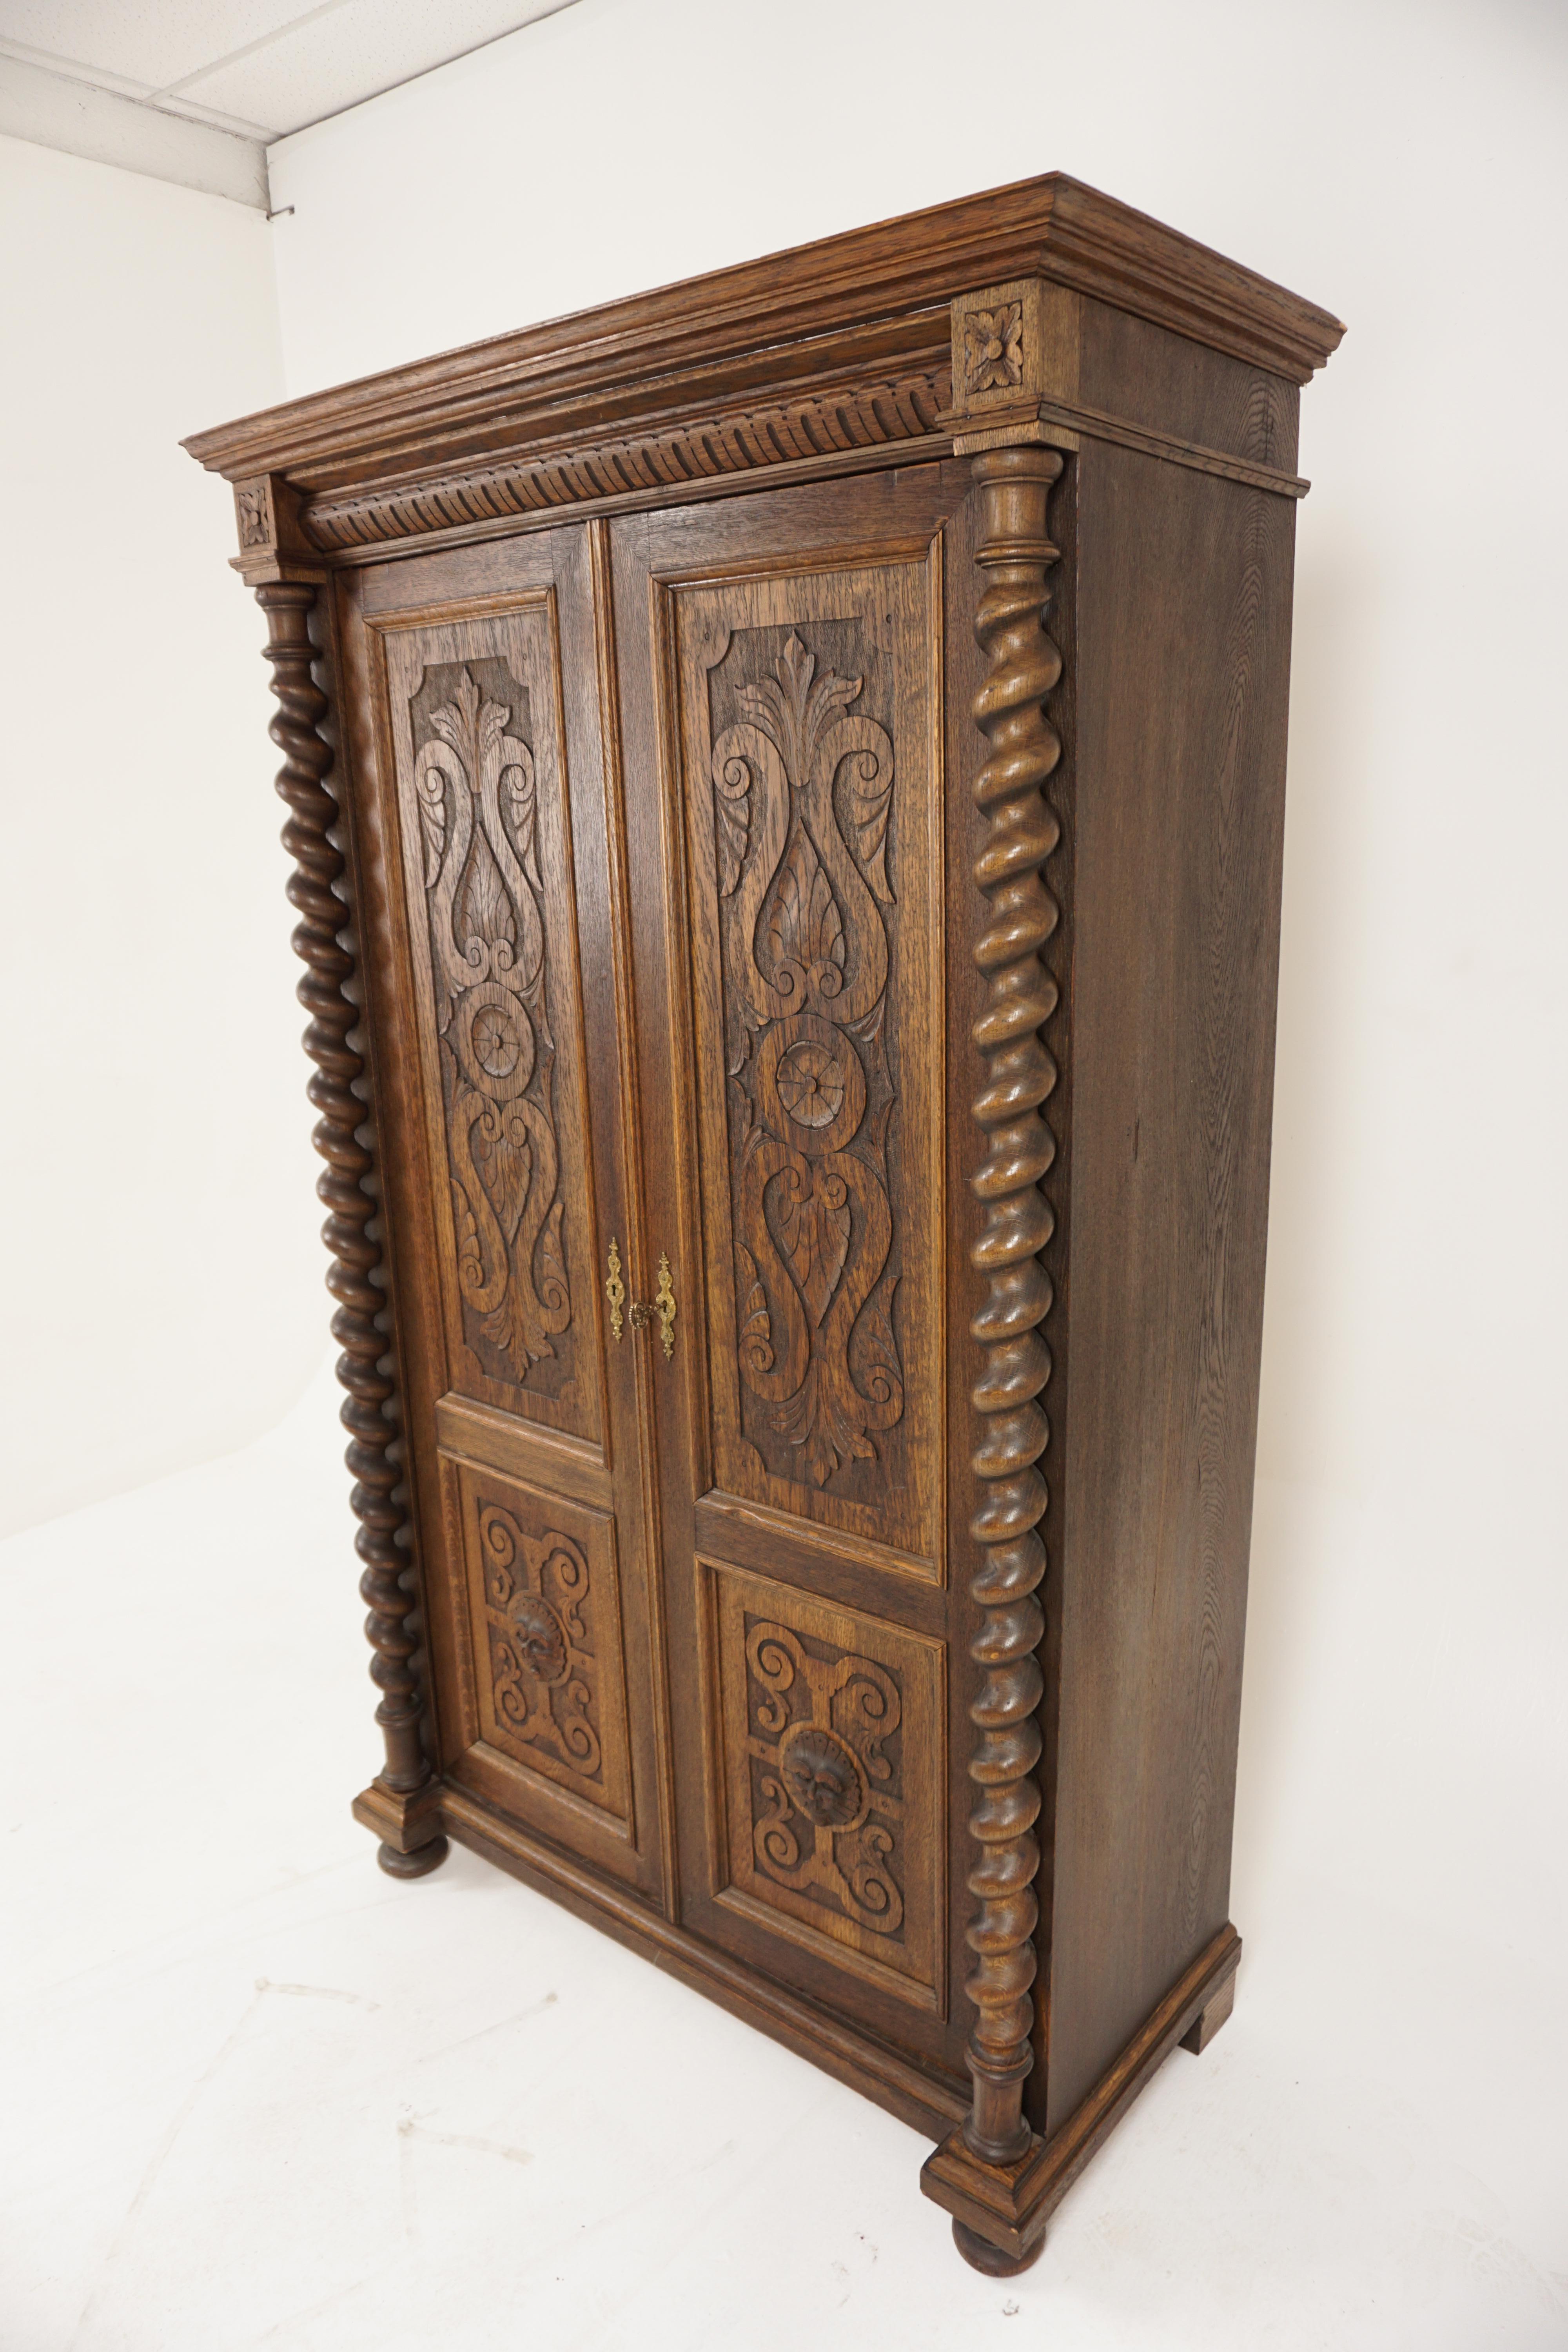 Victorian Carved Oak Hall Robe Barley Twist Closet, Bookcase, Scotland 1880, H1173

Scotland 1880
Solid Oak
Original Finish
With projecting moulded cornice on top
Carved frieze underneath
With tow carved panelled doors with scrolling foliage
Barley